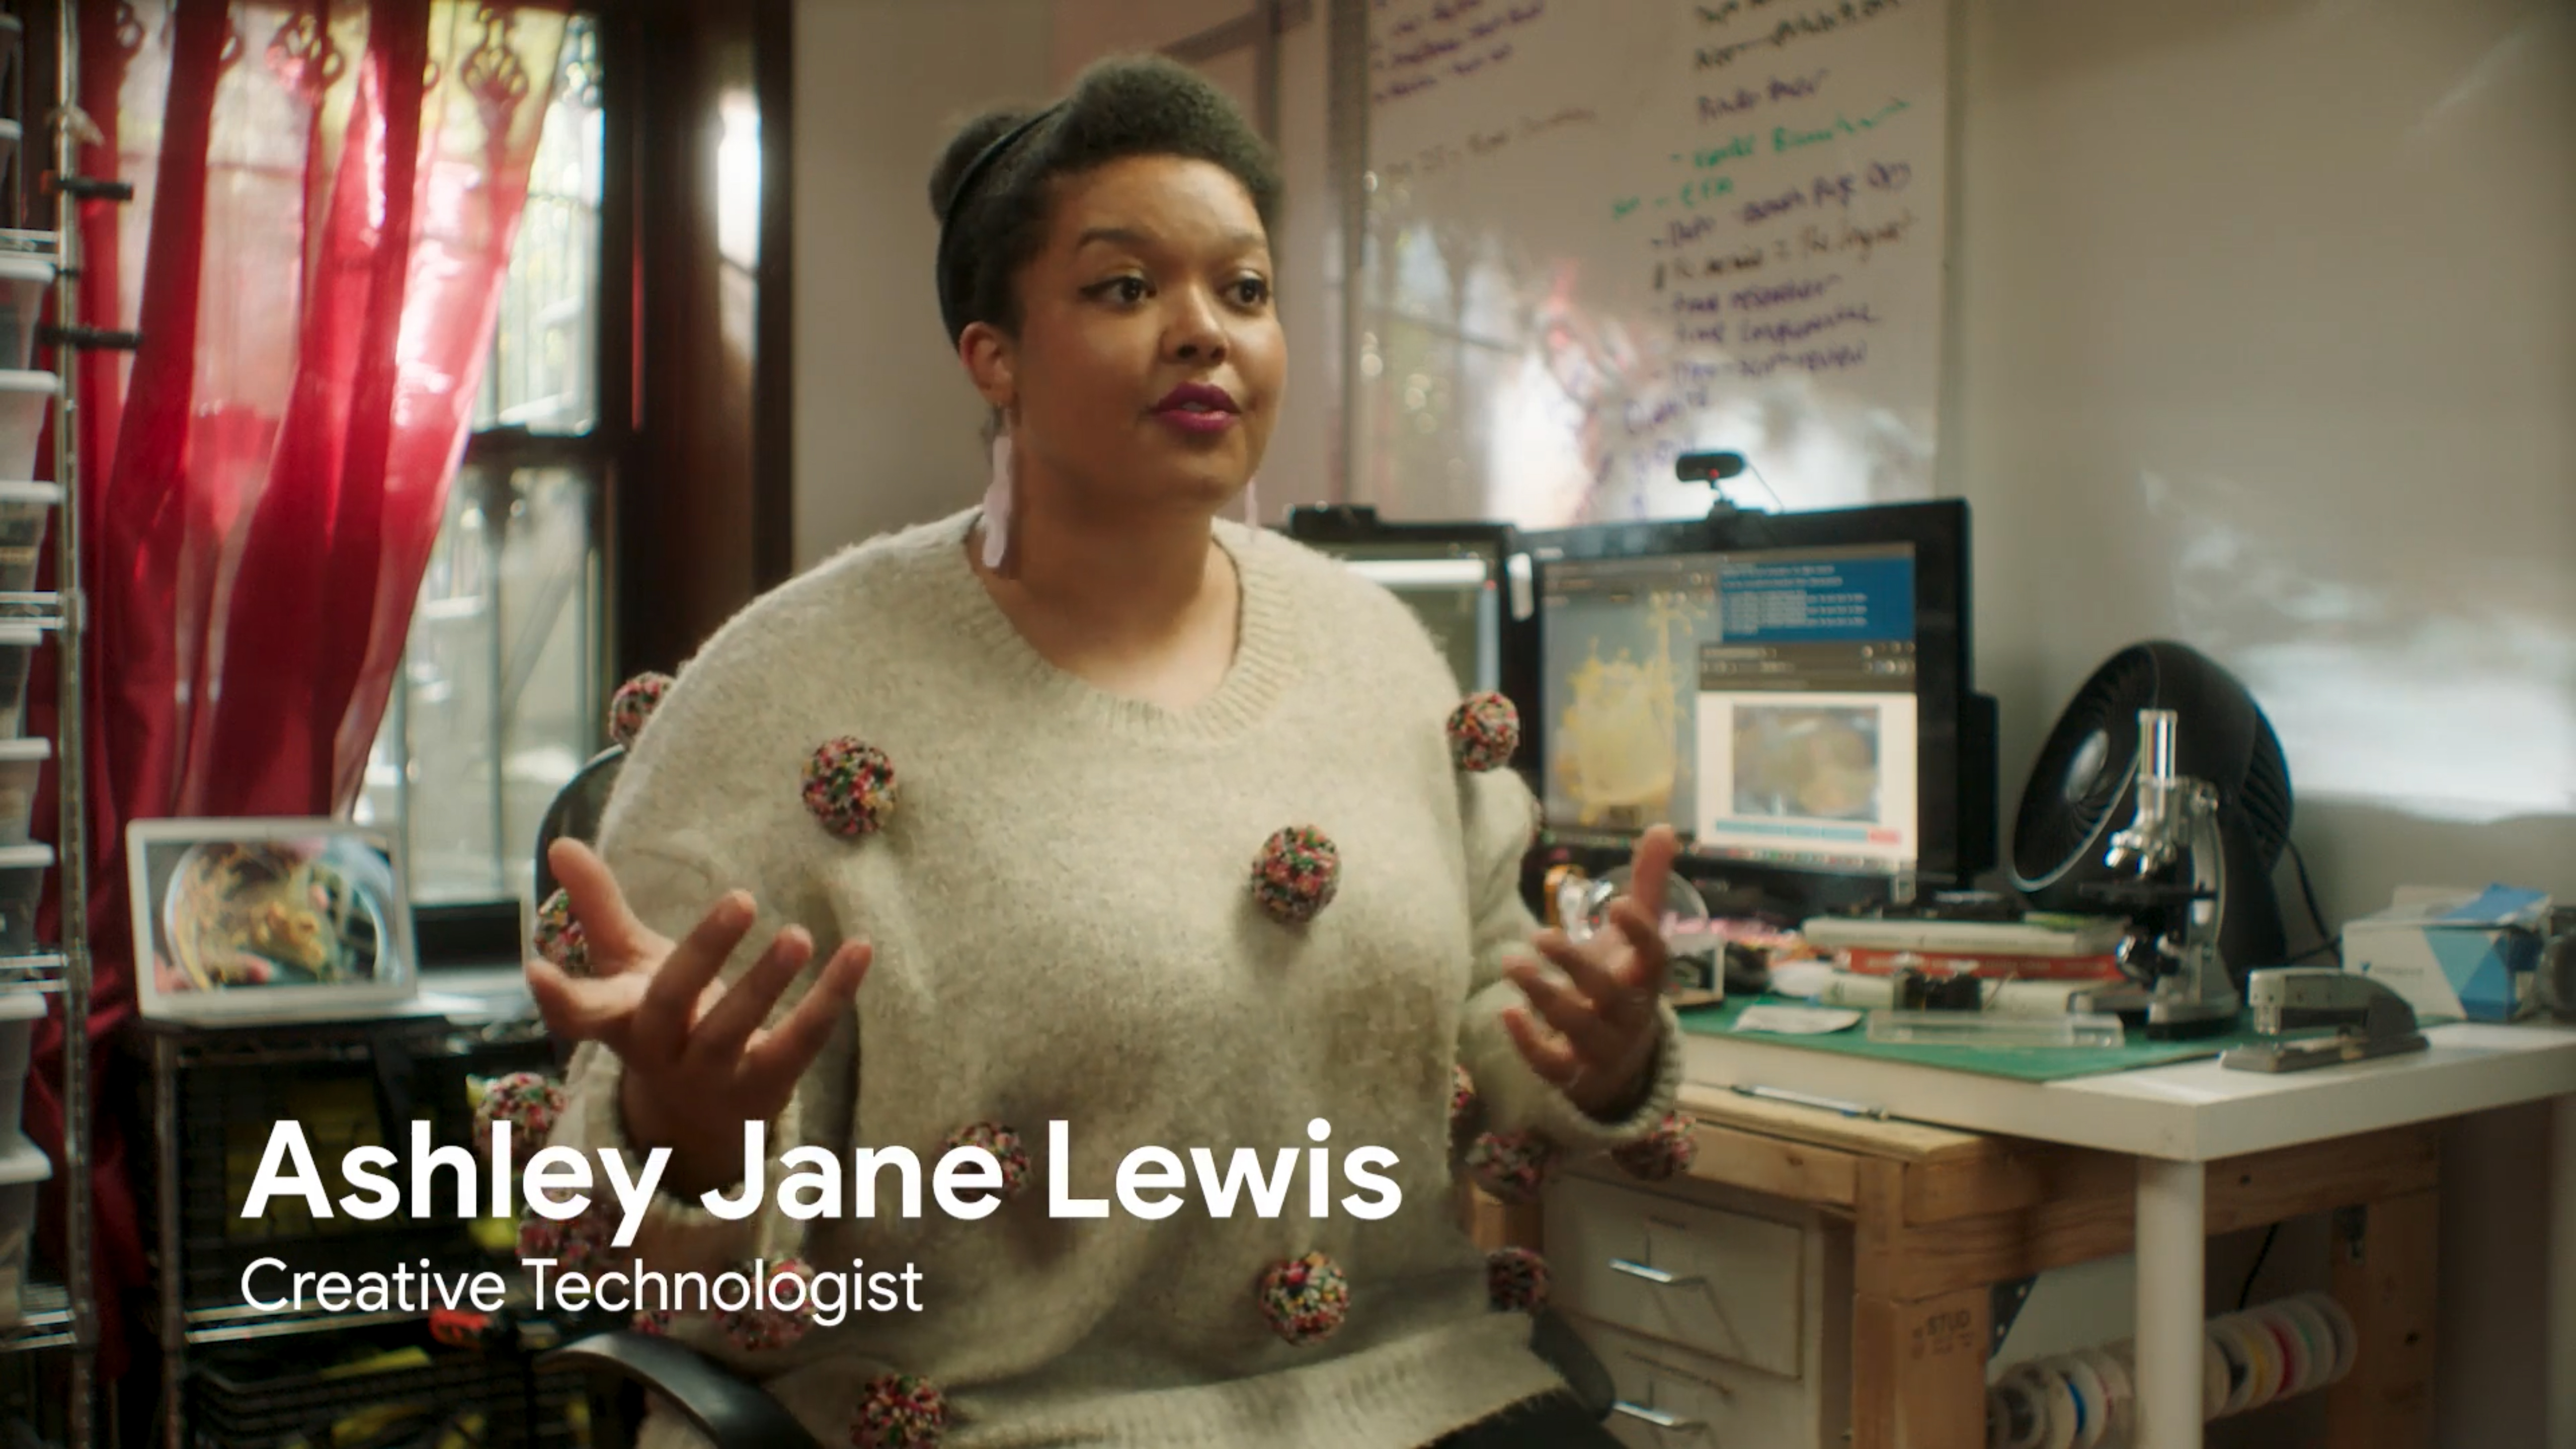 Ashley Jane Lewis is using slime mold to drive conversations about equity